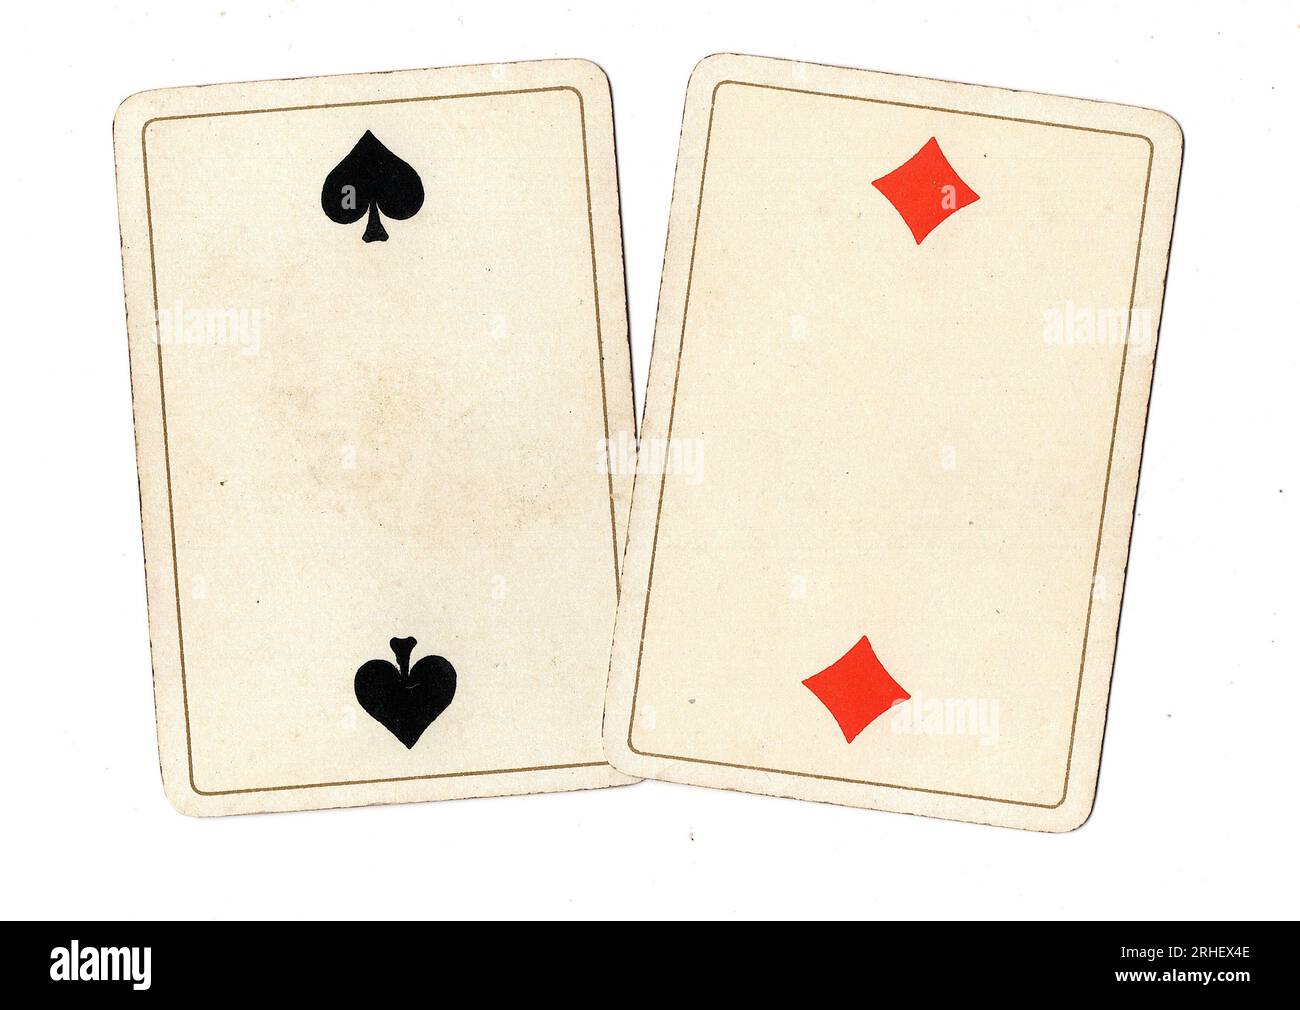 File:Two Pair - Aces and Twos - Poker Hand (15094740846).jpg - Wikimedia  Commons